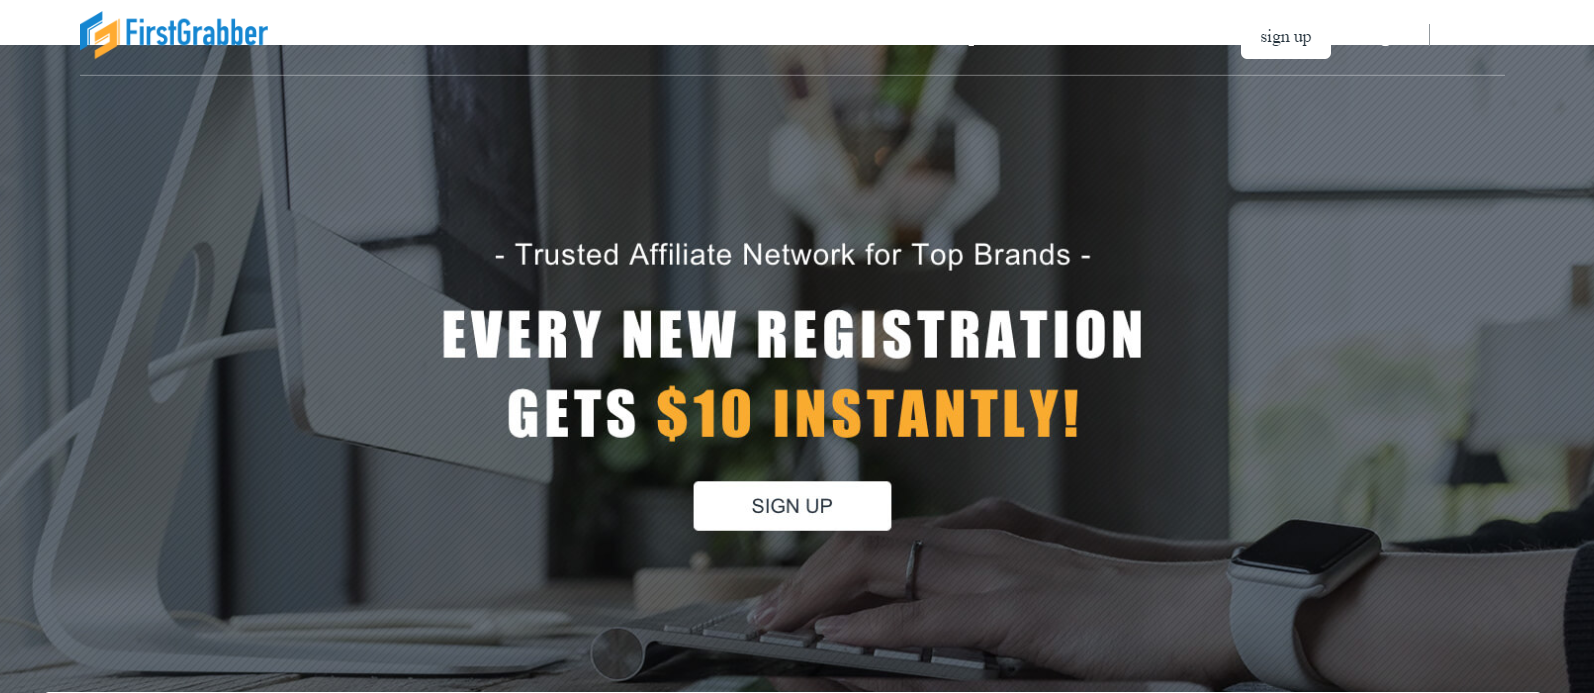 FirstGrabber Review- Trusted Affiliate Network For Top Brands